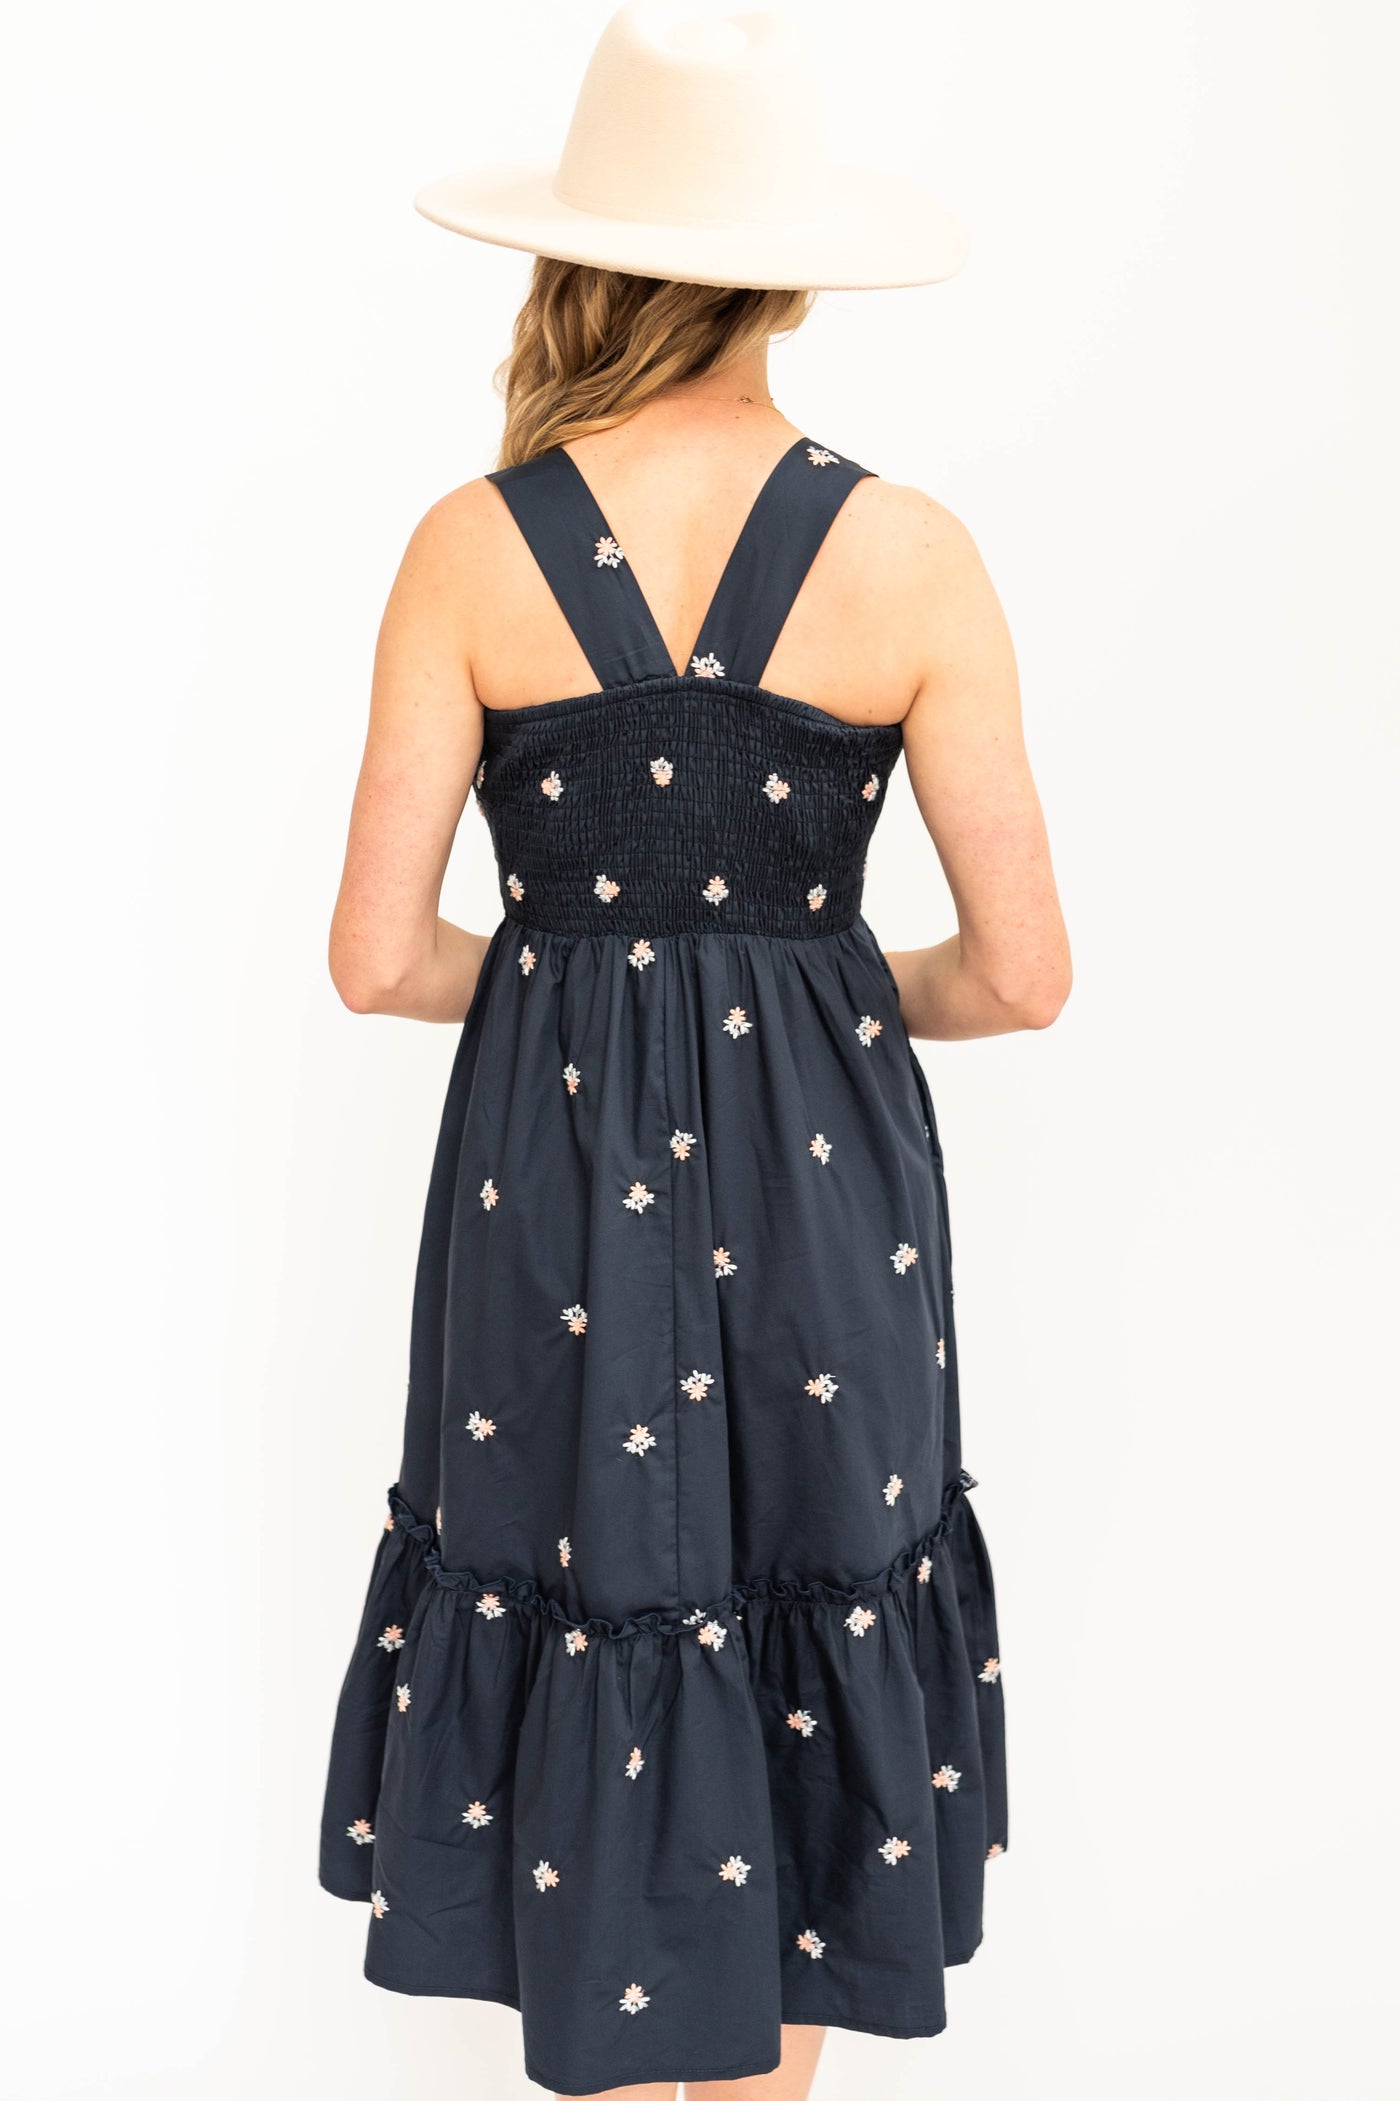 Back view of navy sundress with floral print.